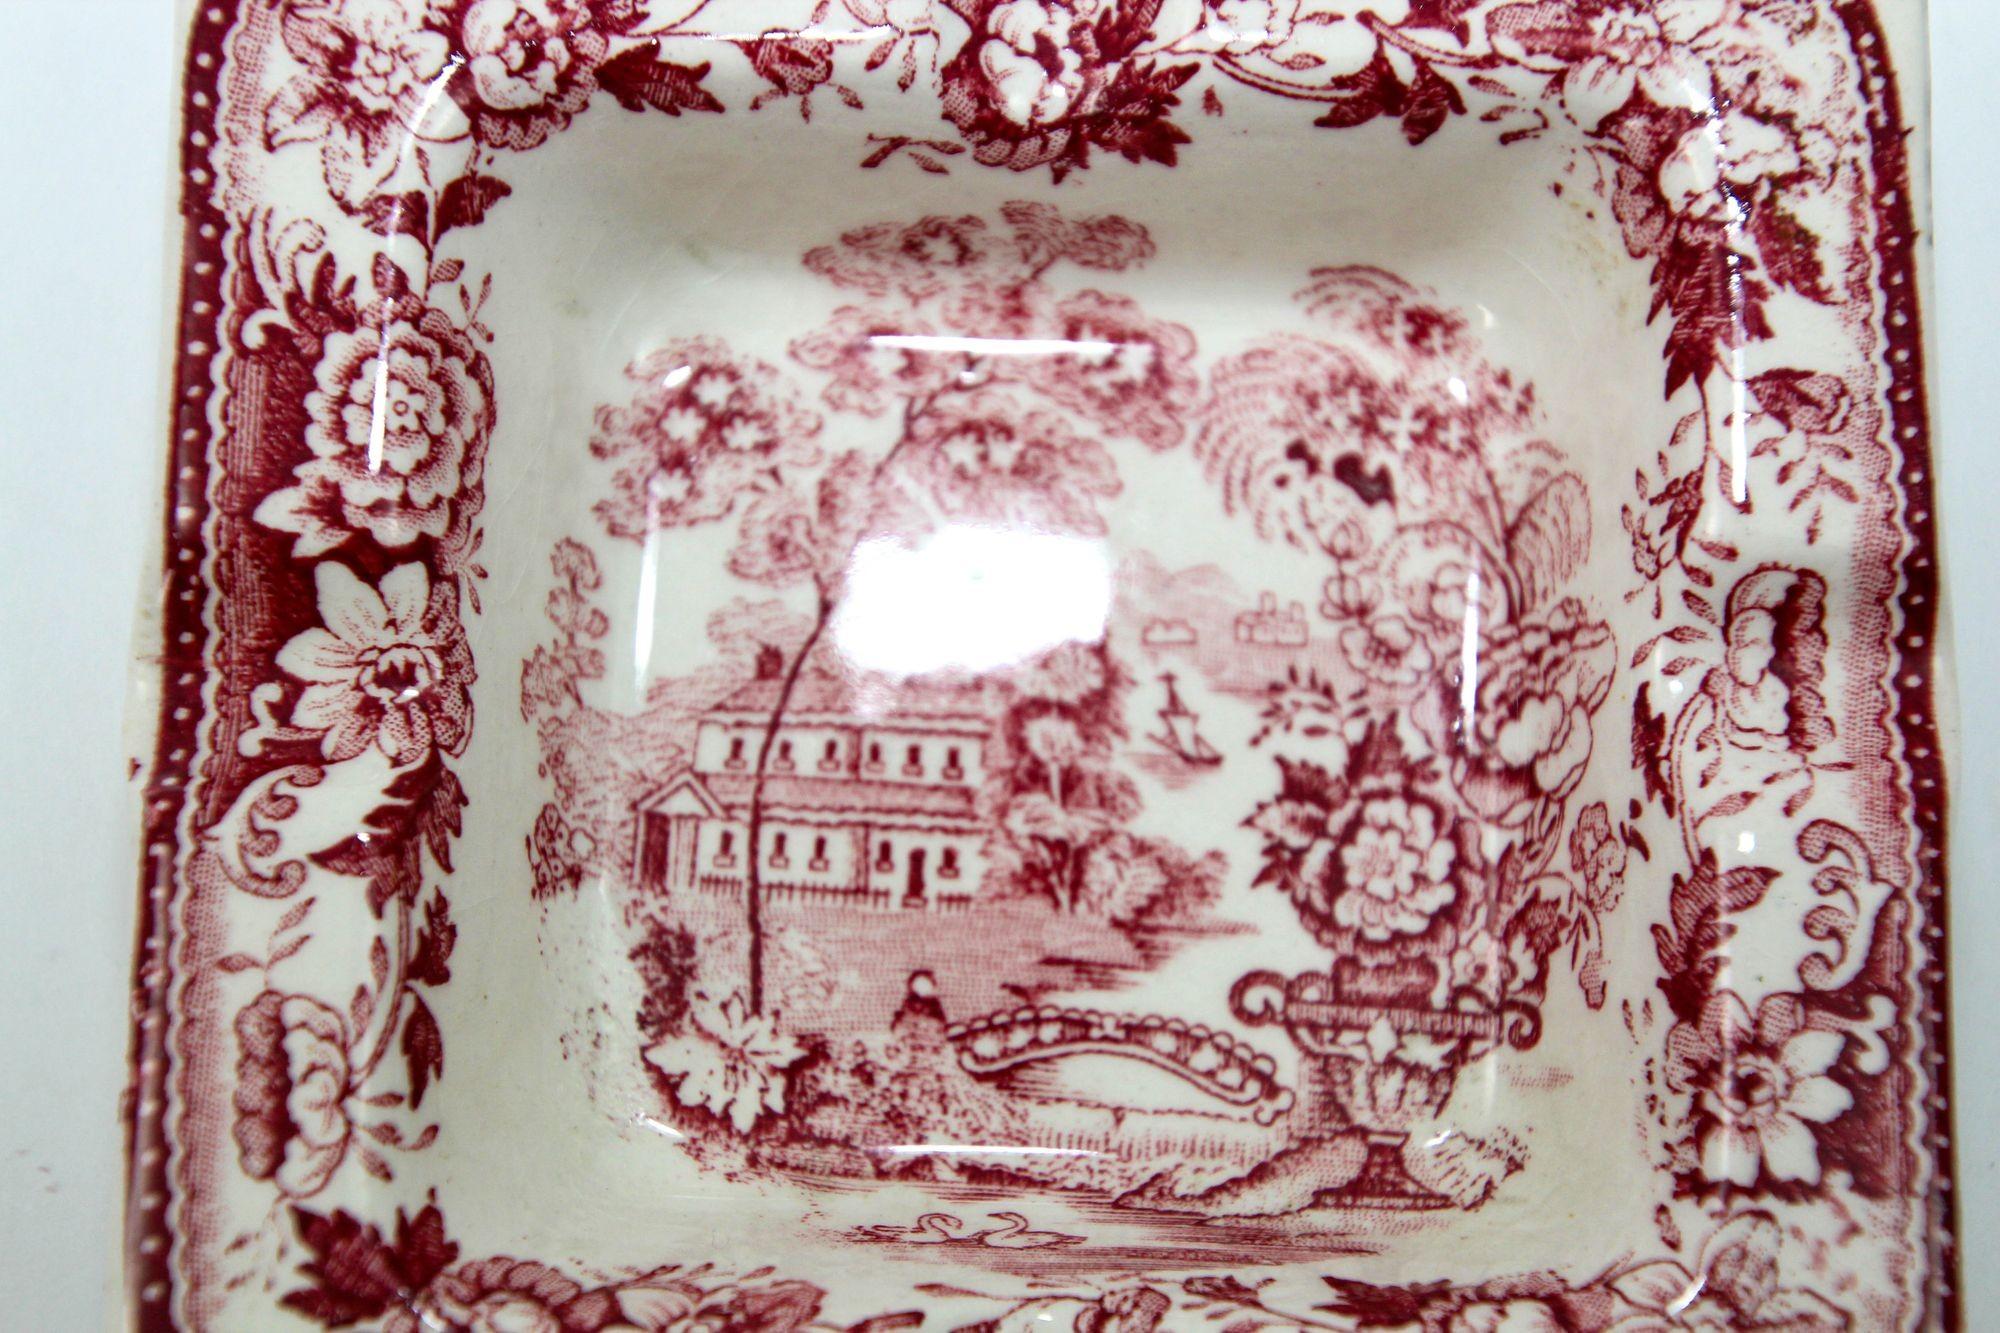 Tonquin Red Pink by ROYAL STAFFORDSHIRE by Clarice Cliff made in England Ashtray.Royal Staffordshire Tonquin Red Pink Clarice Cliff Transferware Dish.Vintage Square dish with a lovely scene of large house by river, bridge, swans & flowers.Use it as